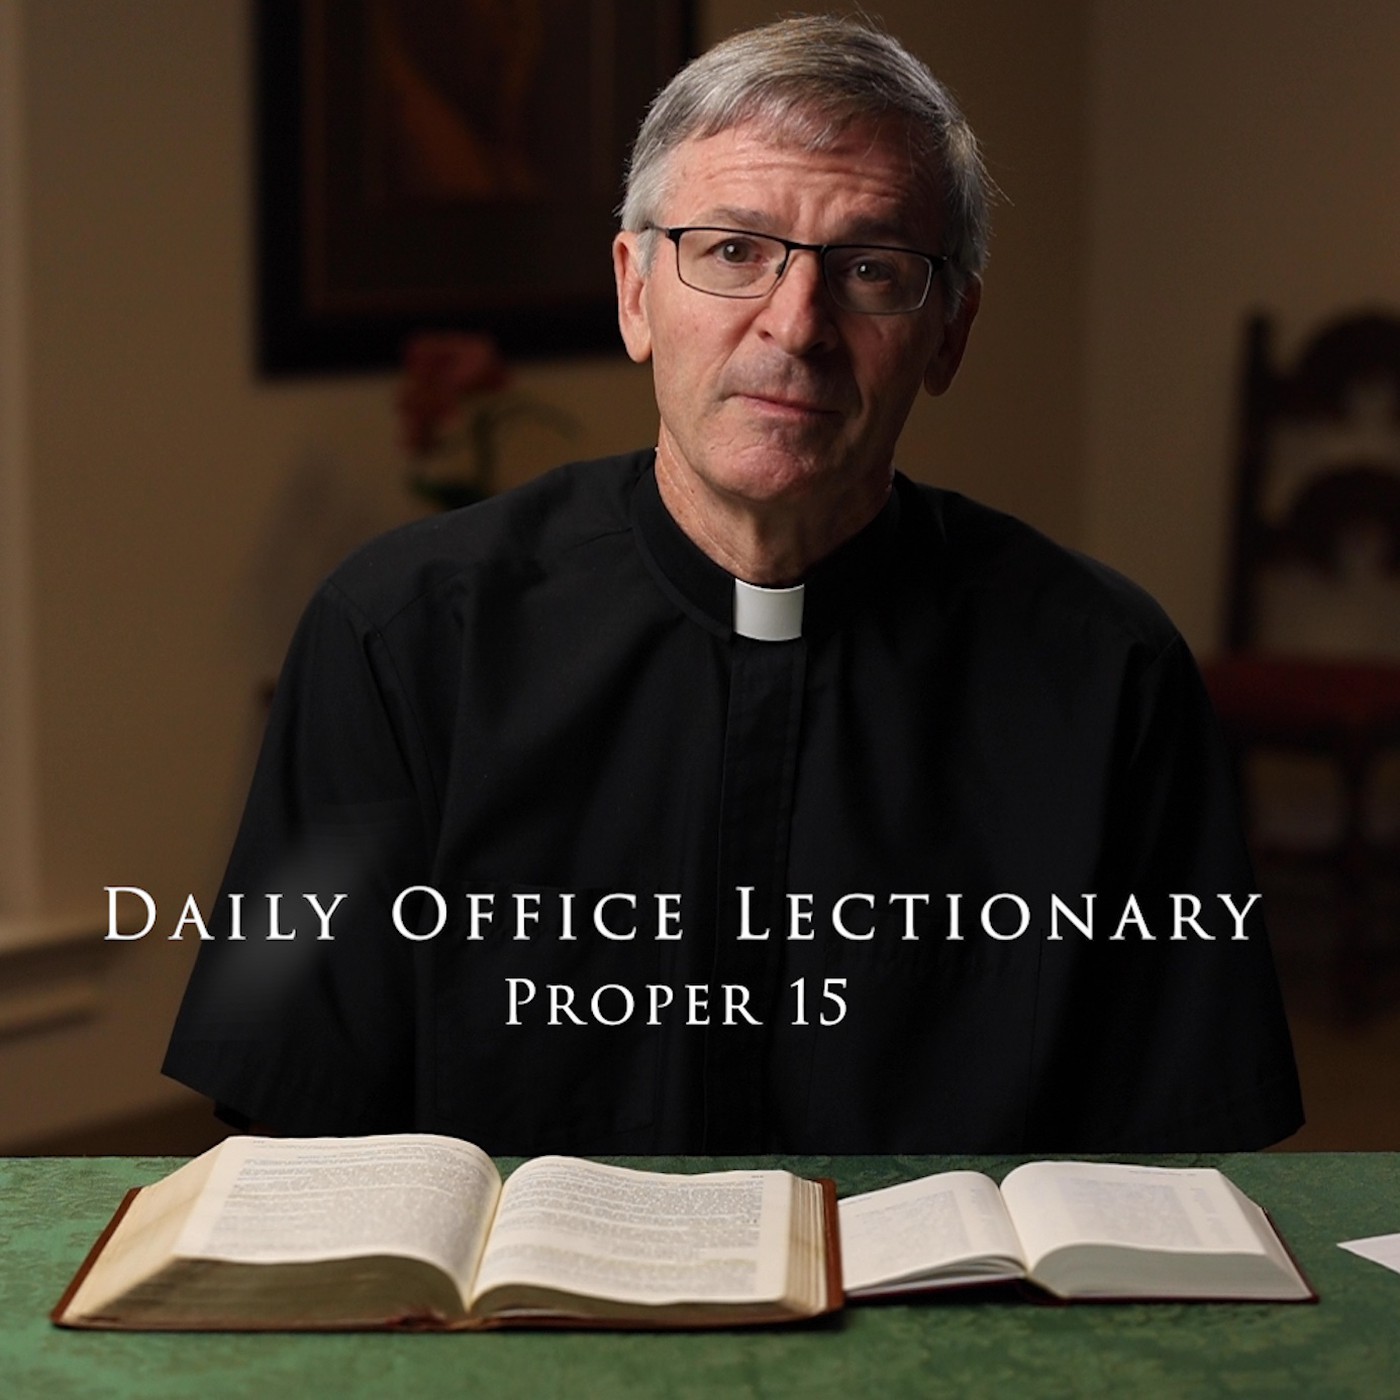 The Daily Office Lectionary with Father Reid